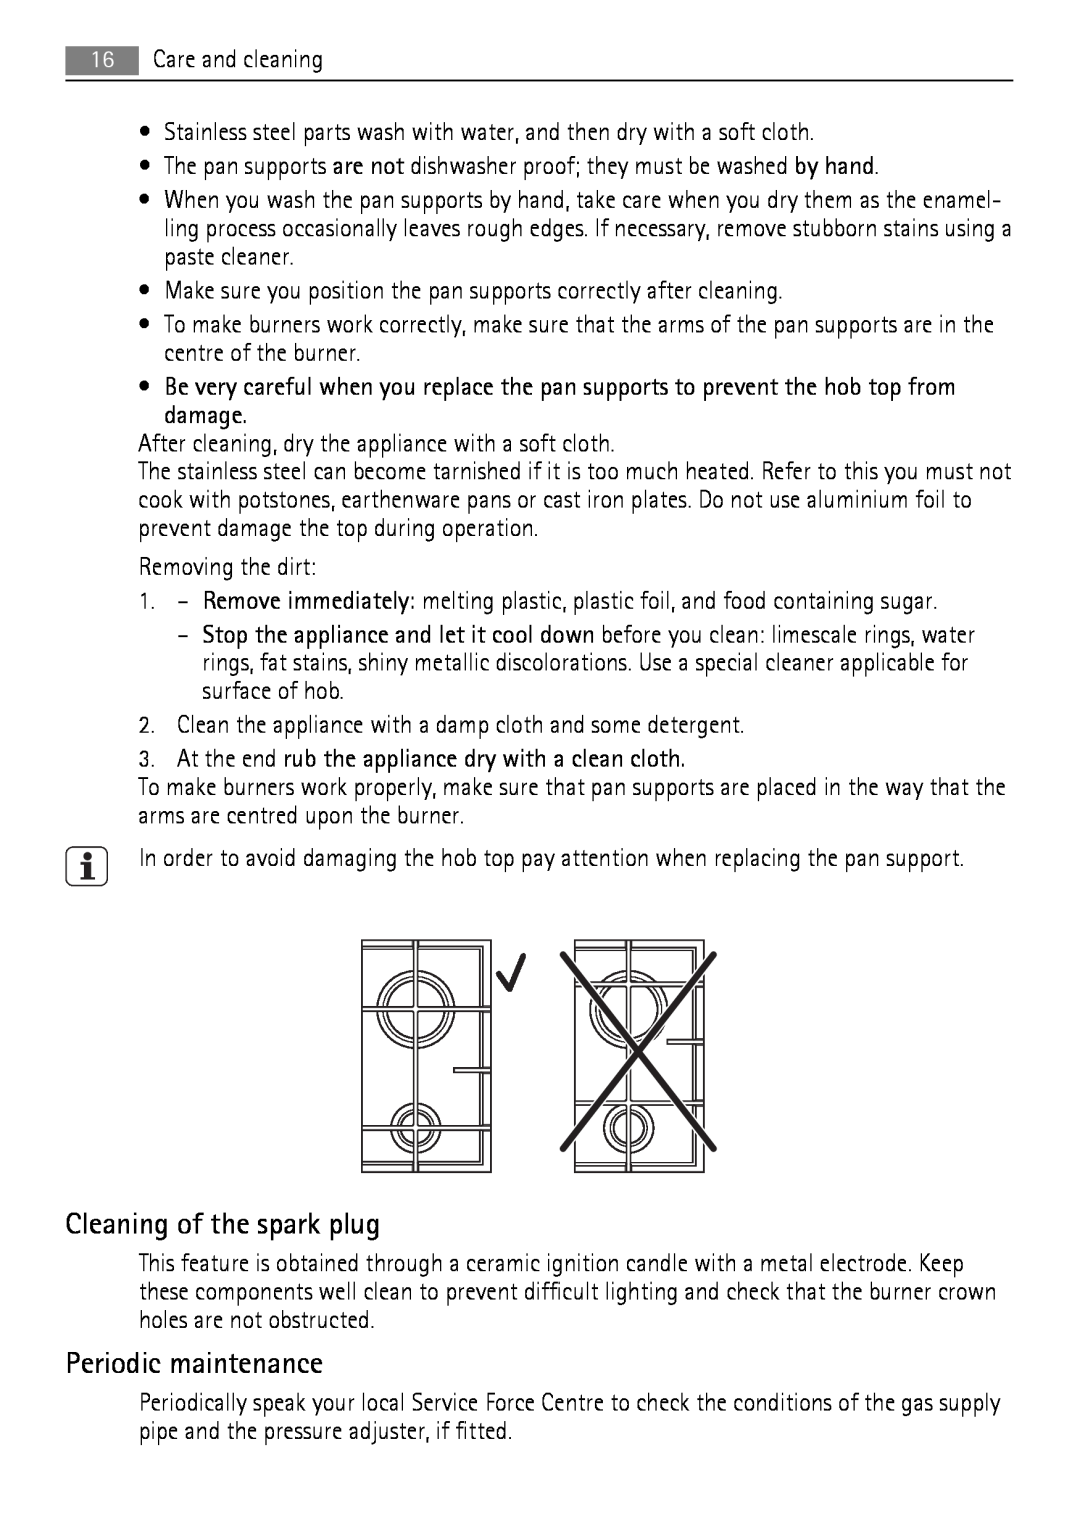 AEG HG654440SM user manual Cleaning of the spark plug, Periodic maintenance 